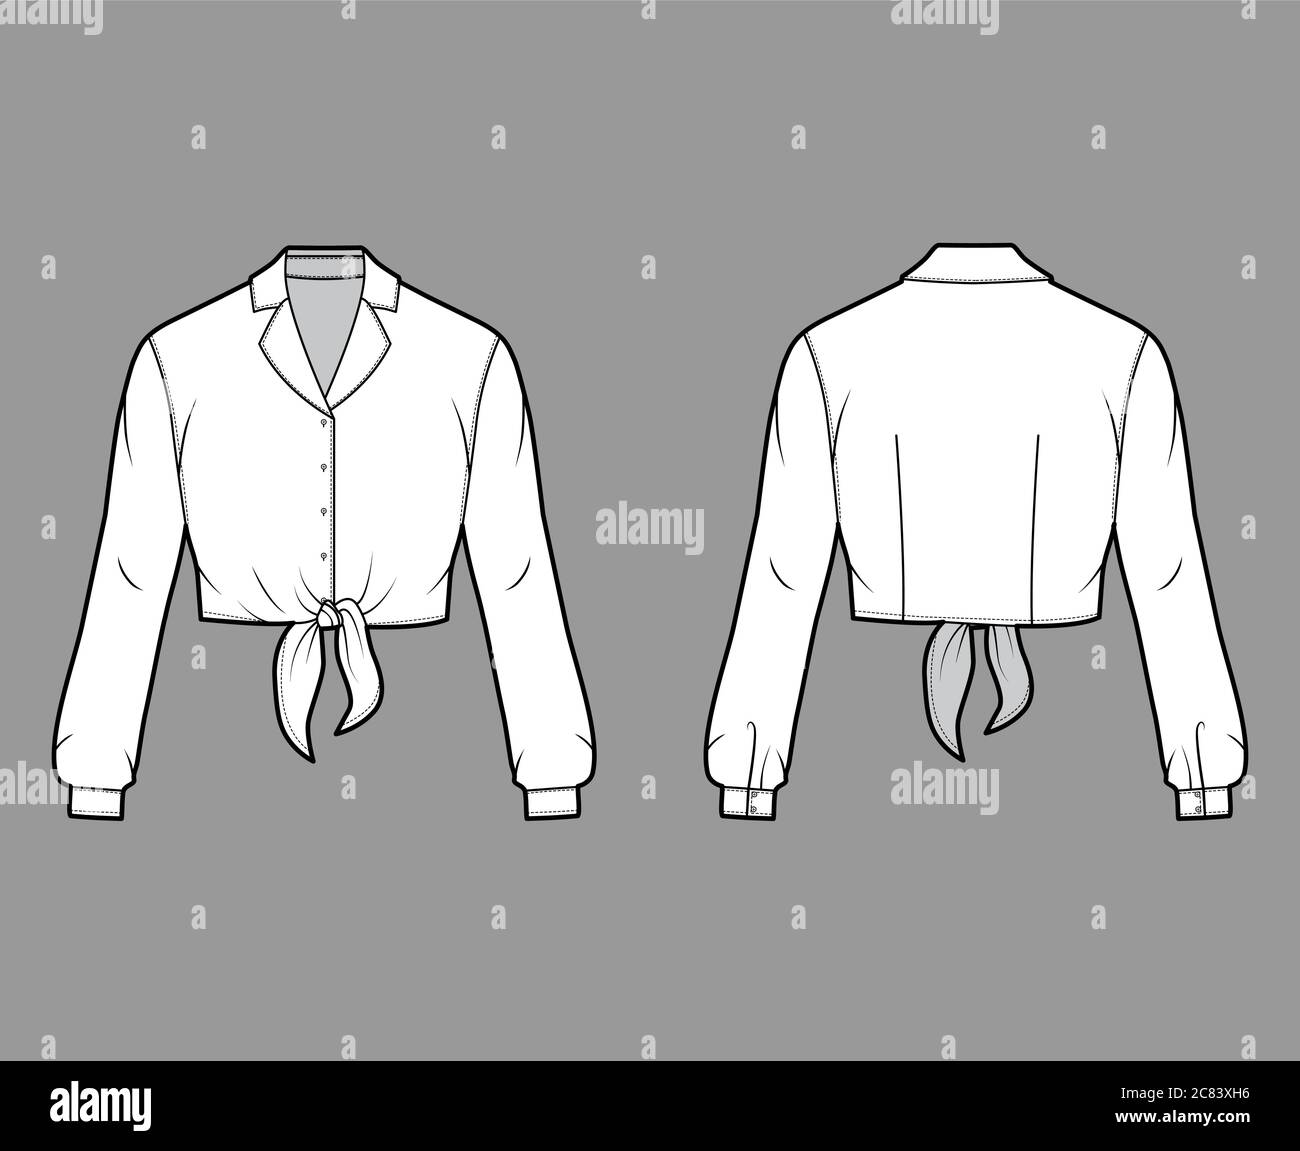 Cropped tie-front shirt technical fashion illustration with notched ...